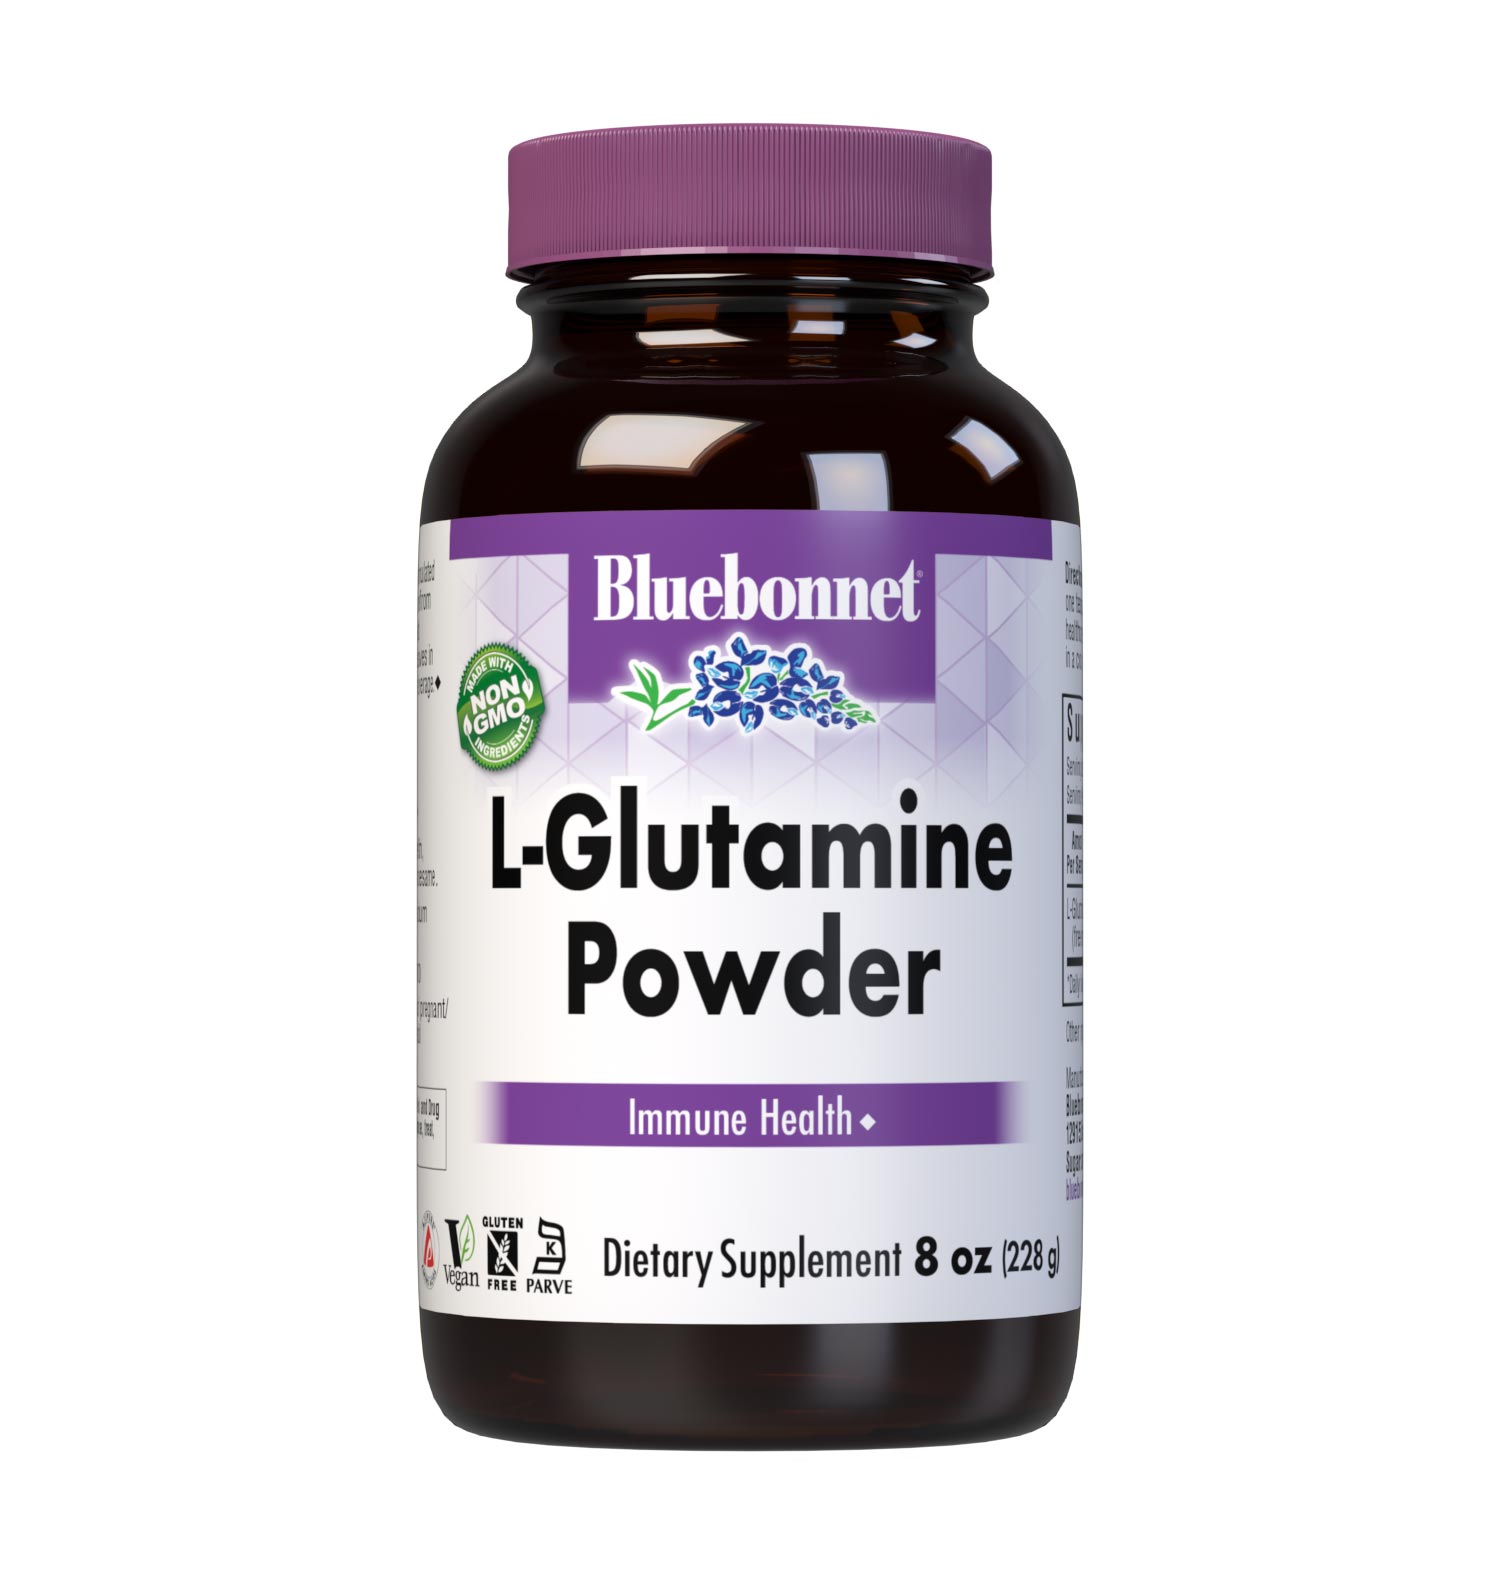 Bluebonnet’s L-Glutamine Powder, 8 oz, formulated with the tree-form amino acid L-glutamine in its form from Ajinomoto to help support immune function. #size_8 oz